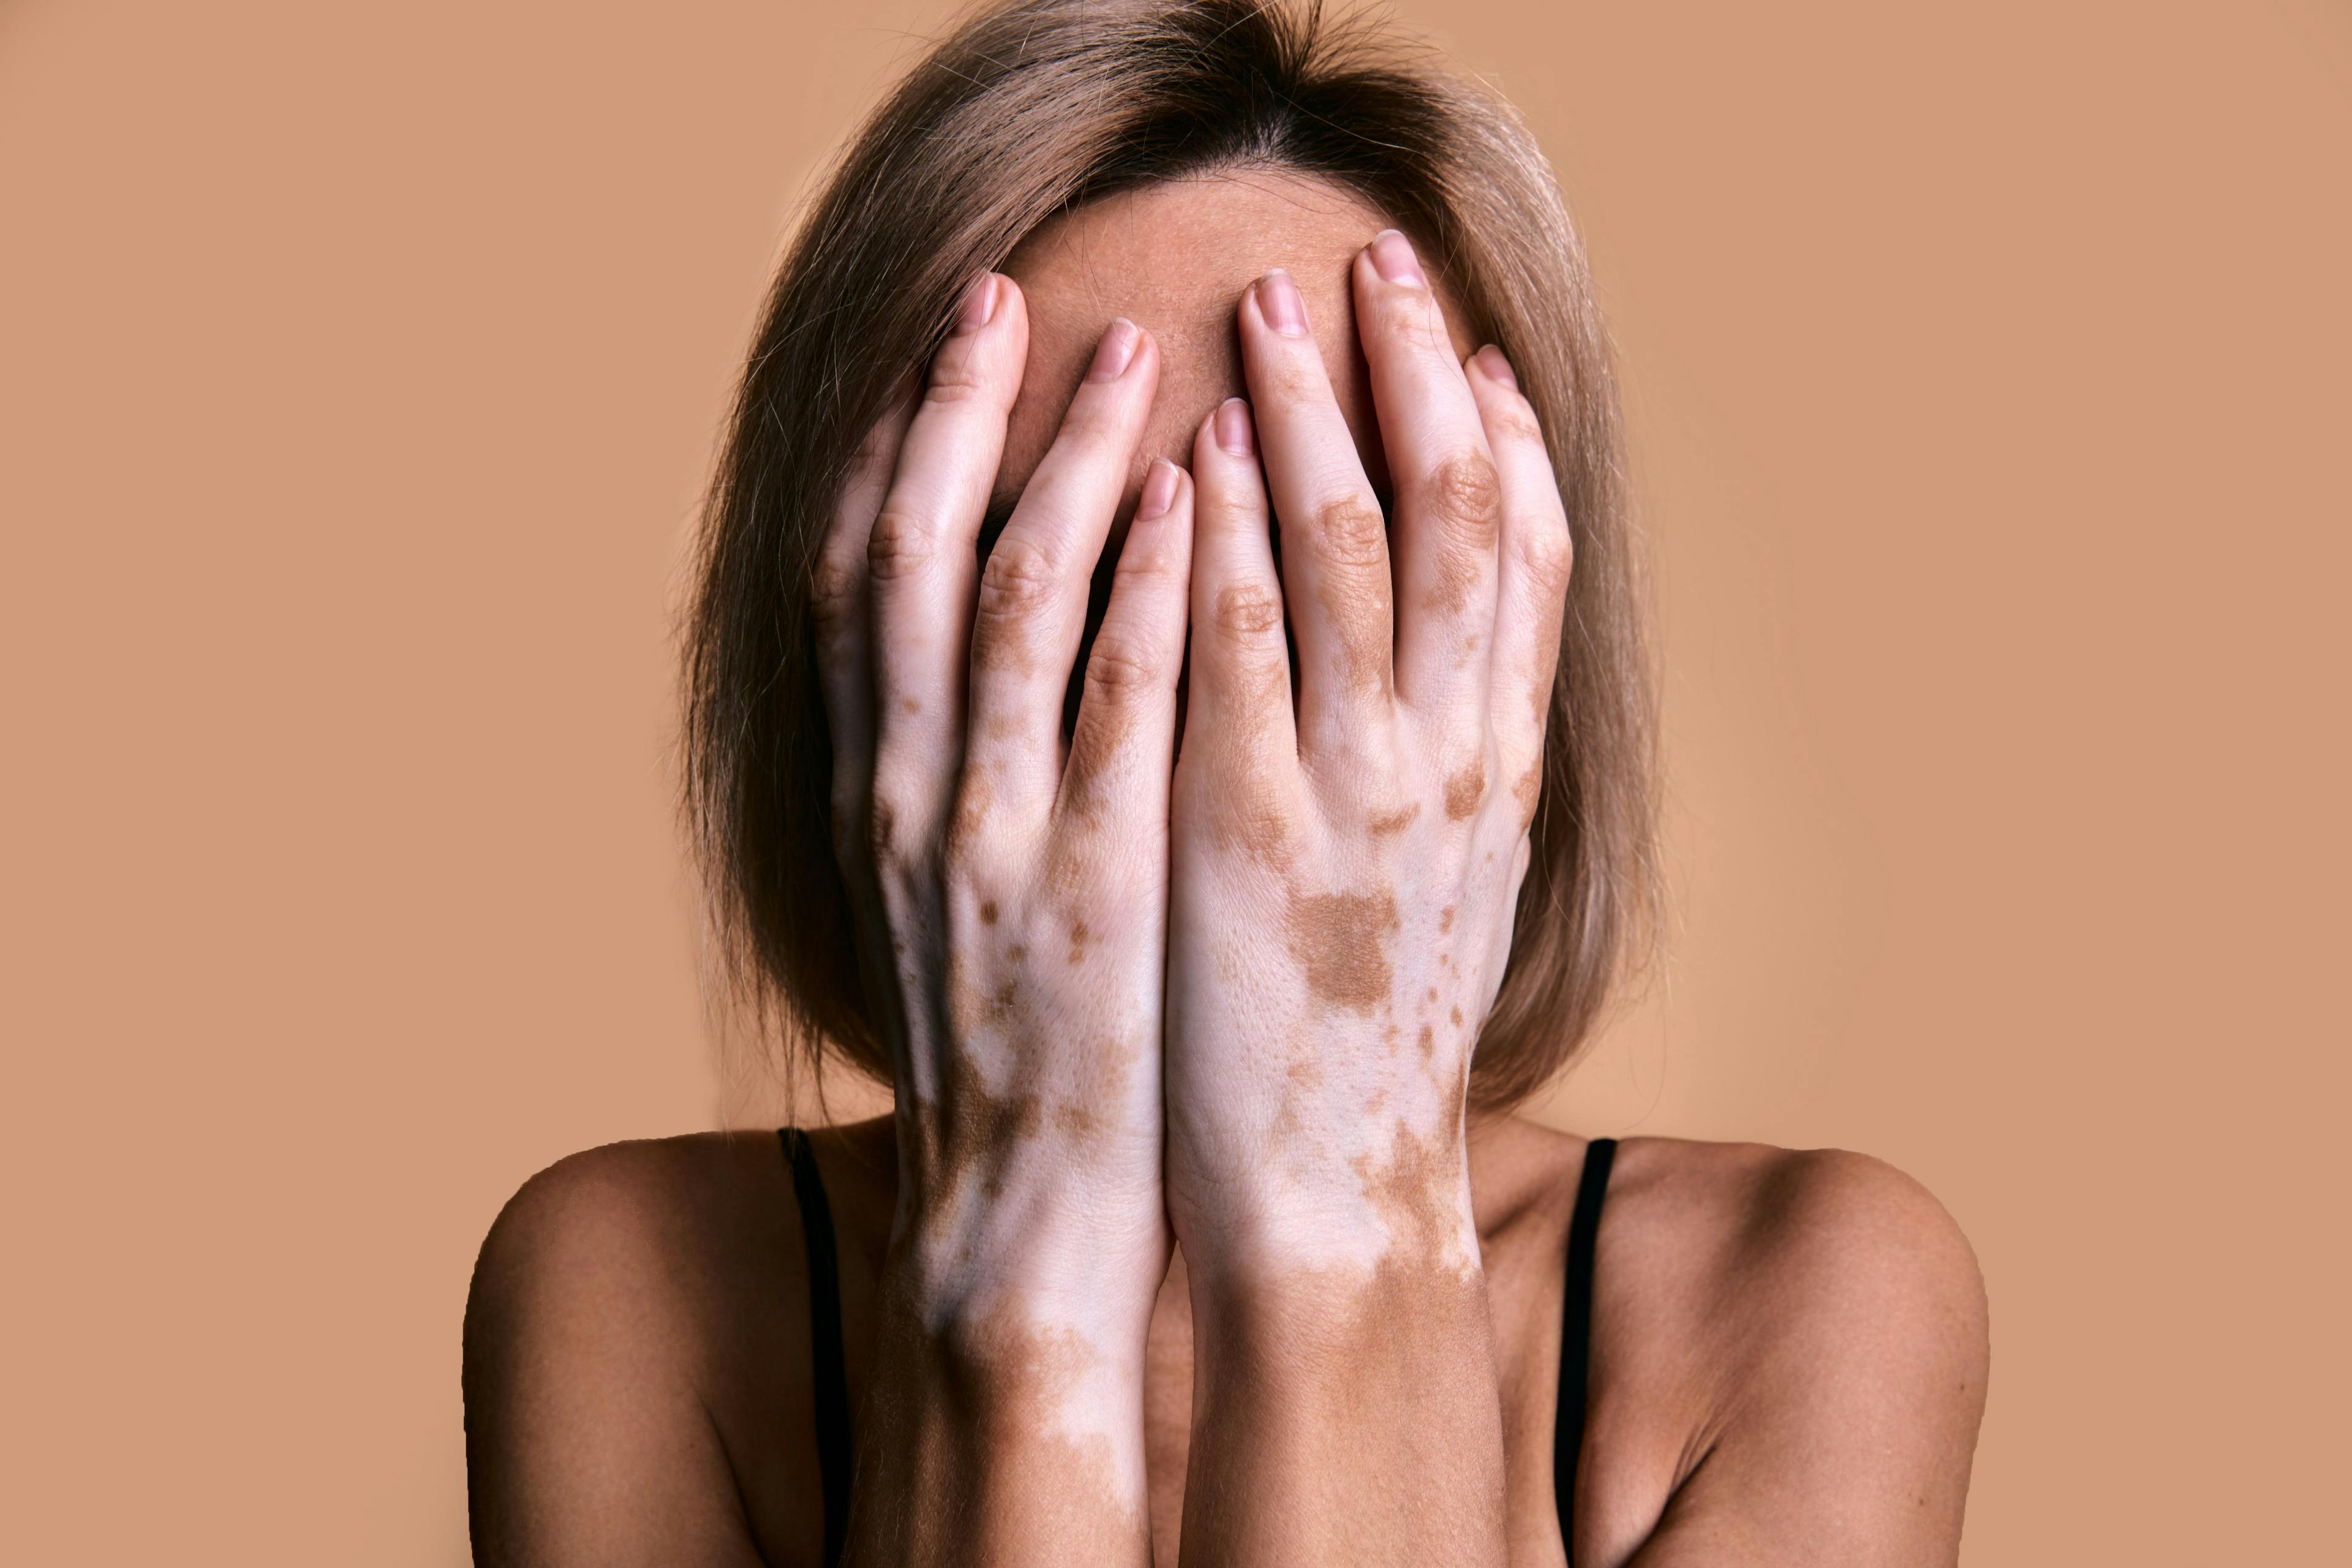 patient with vitiligo covering her face with her hands | Image Credit: Savory - stock.adobe.com